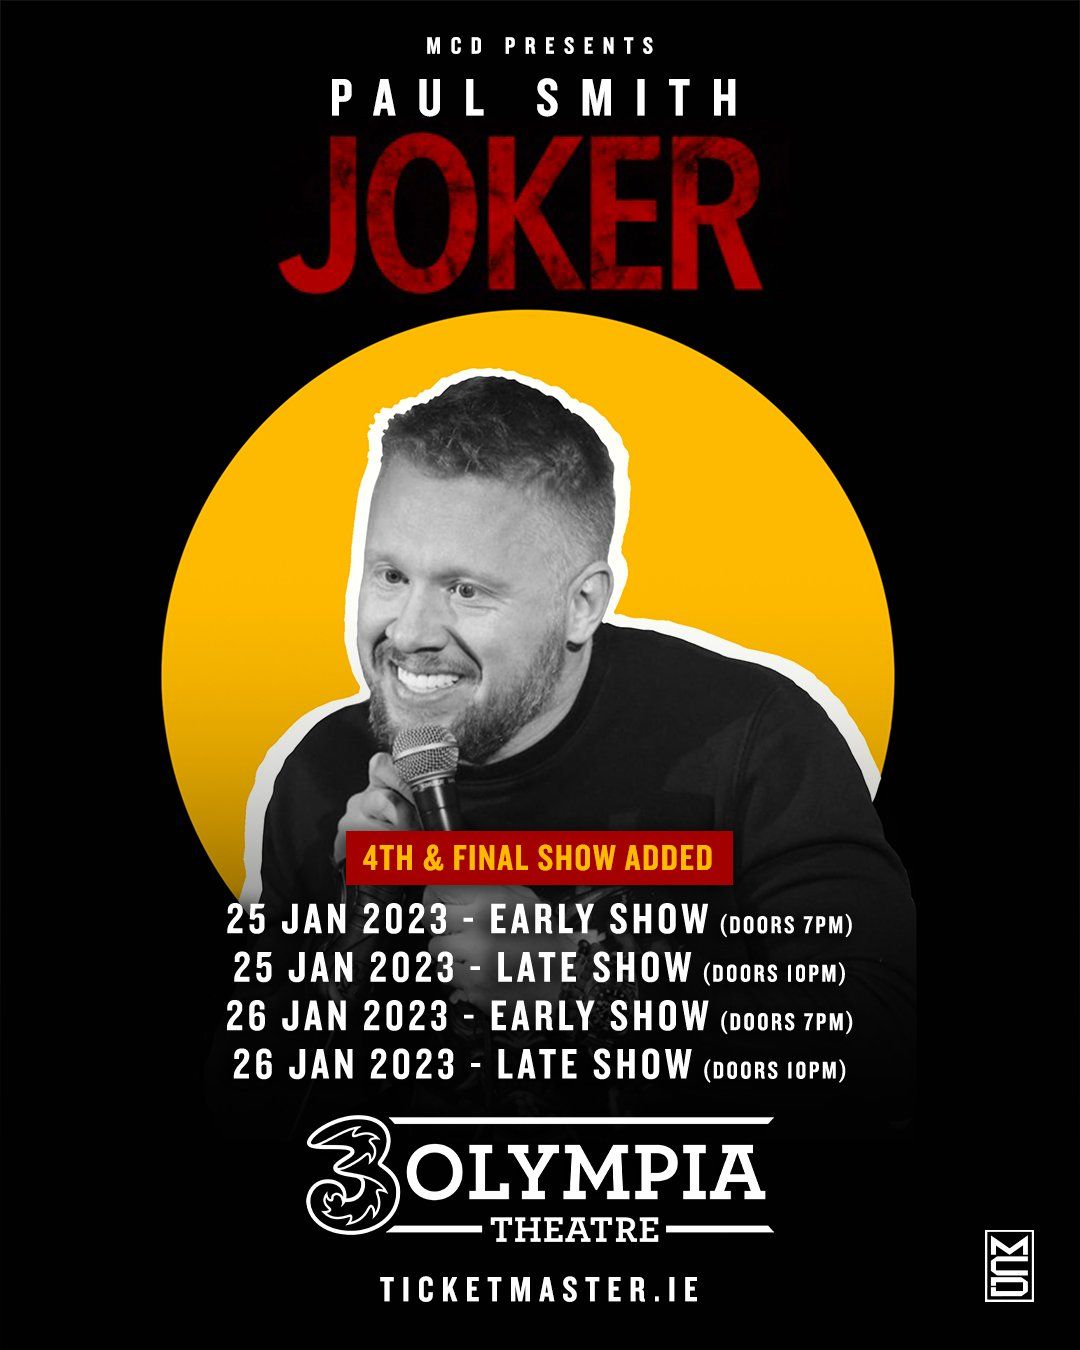 PAUL SMITH  BRAND NEW SHOW – JOKER  DUE TO PHENOMENAL DEMAND  FOURTH AND FINAL 3OLYMPIA THEATRE DATE CONFIRMED